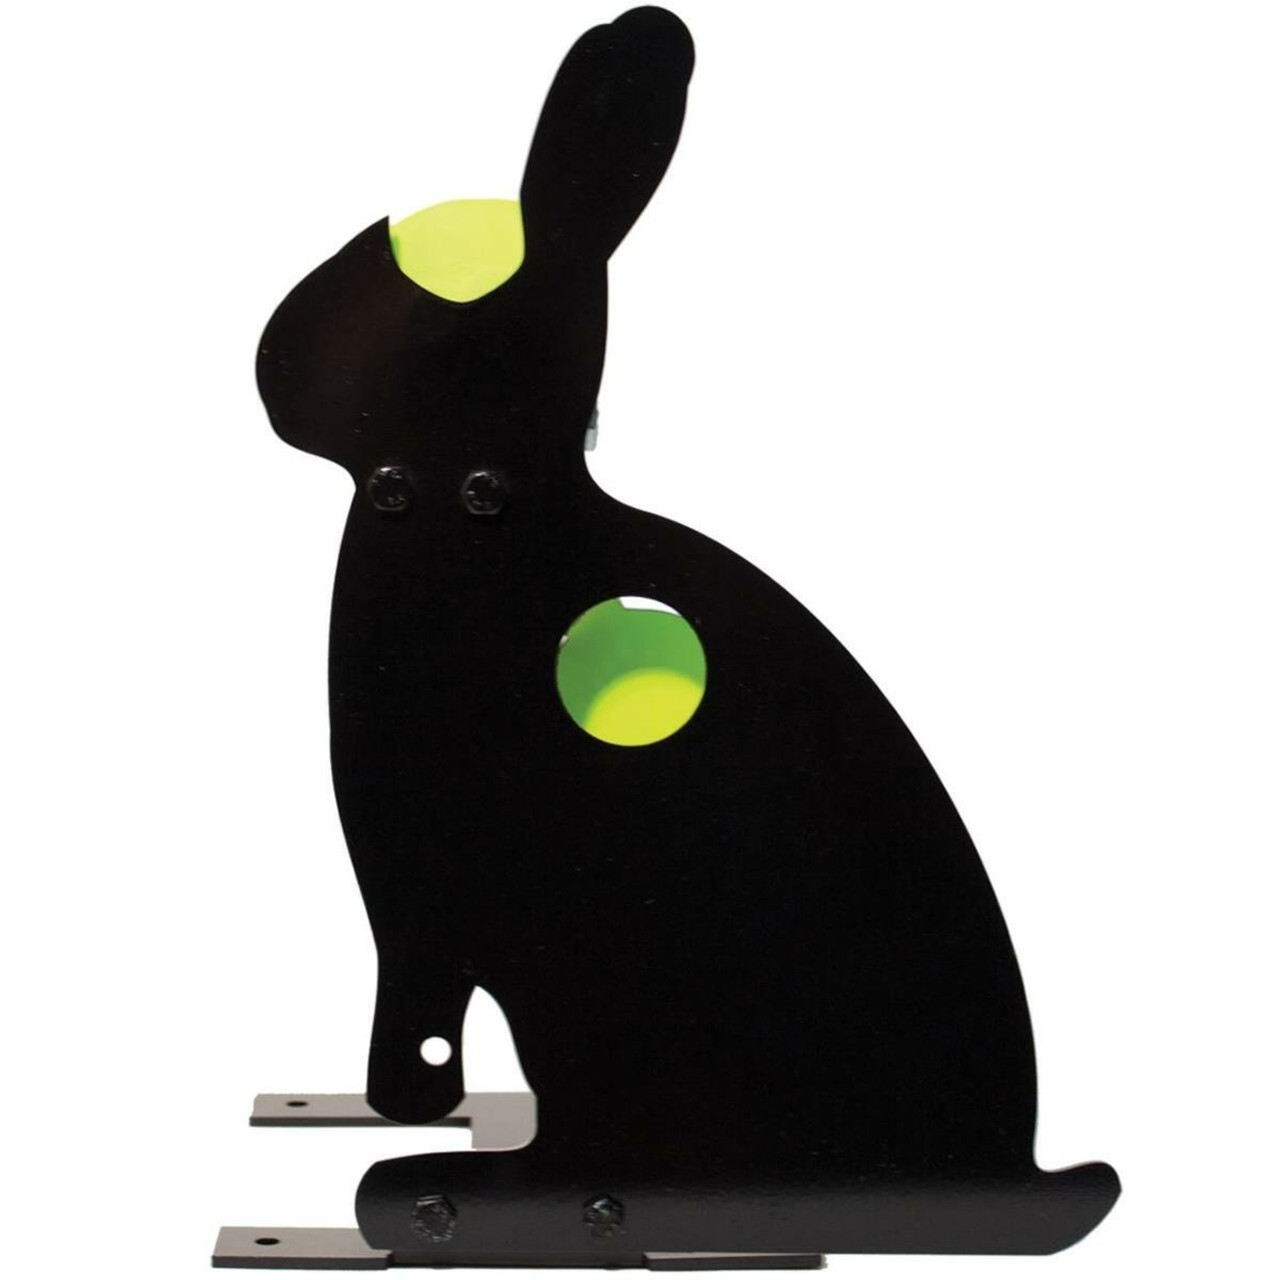 Gr8fun Kill Zone Targets Bunny Metal Silhouette with resetting paddles